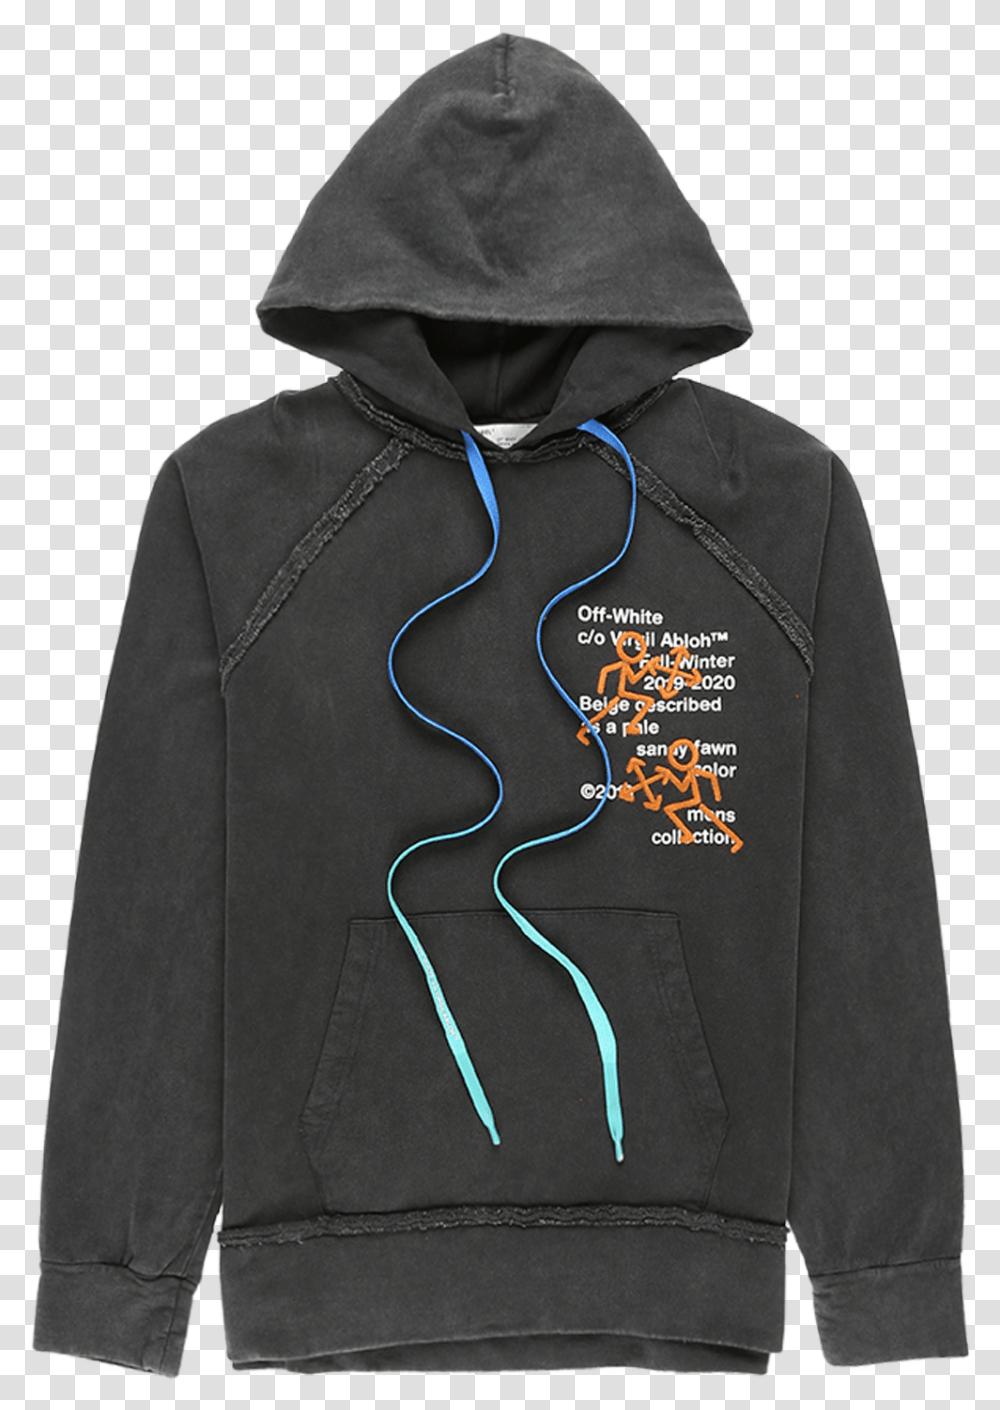 Off White Pictogram Hoodie Off White Fw19 Hoodie, Apparel, Sweatshirt, Sweater Transparent Png